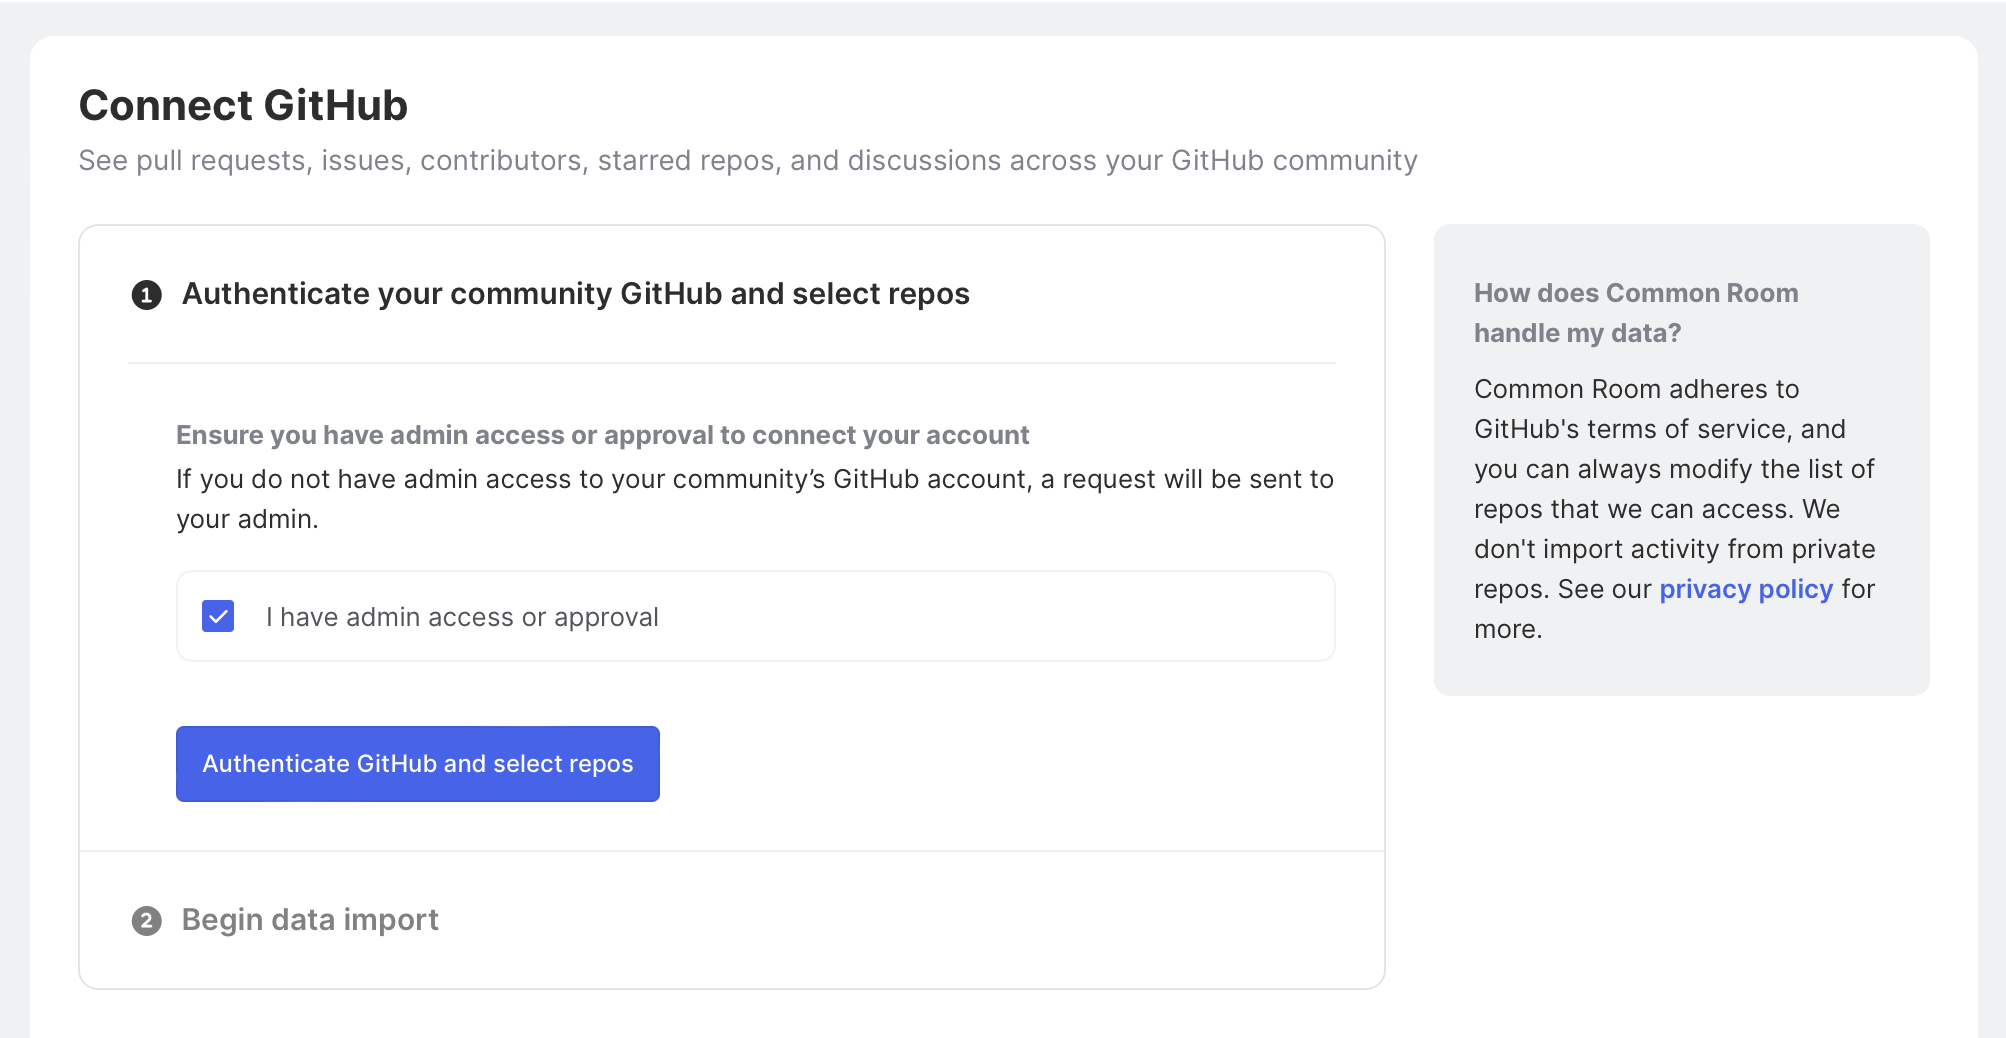 Authenticate GitHub and select repos to pull data from